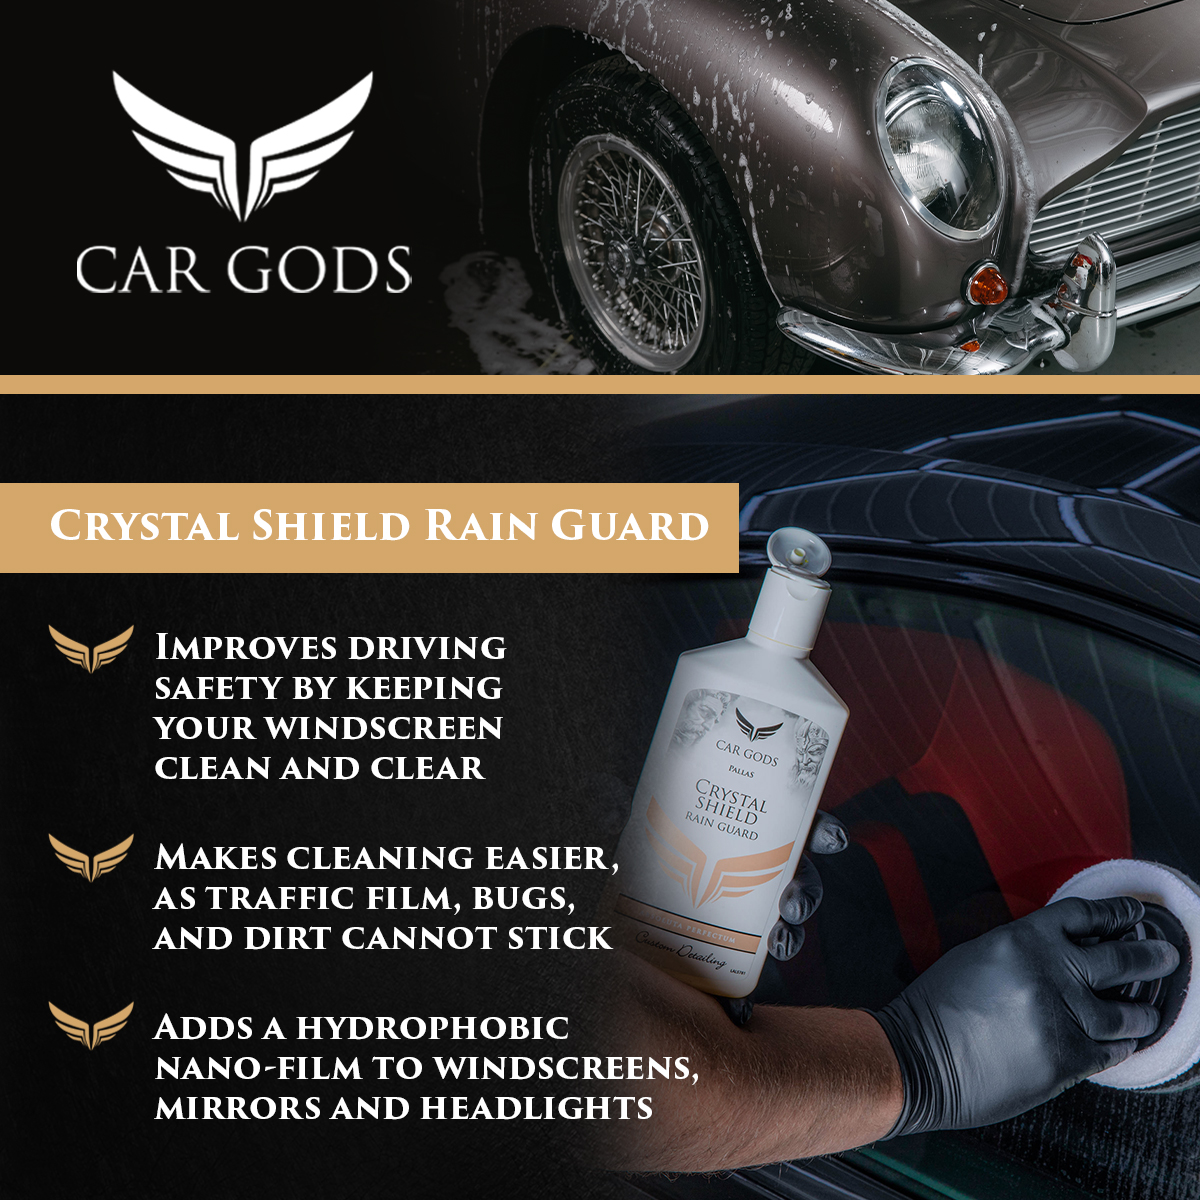 Car Gods Crystal Shield Rain Guard. Improve driving safety and visibility in wet weather with a hydrophobic nano-film to repel rain, sleet, and snow, keeping your windscreen clean and clear. Plus, Car Gods Crystal Shield Rain Guard makes cleaning easier, as traffic film, bugs, and dirt cannot stick.